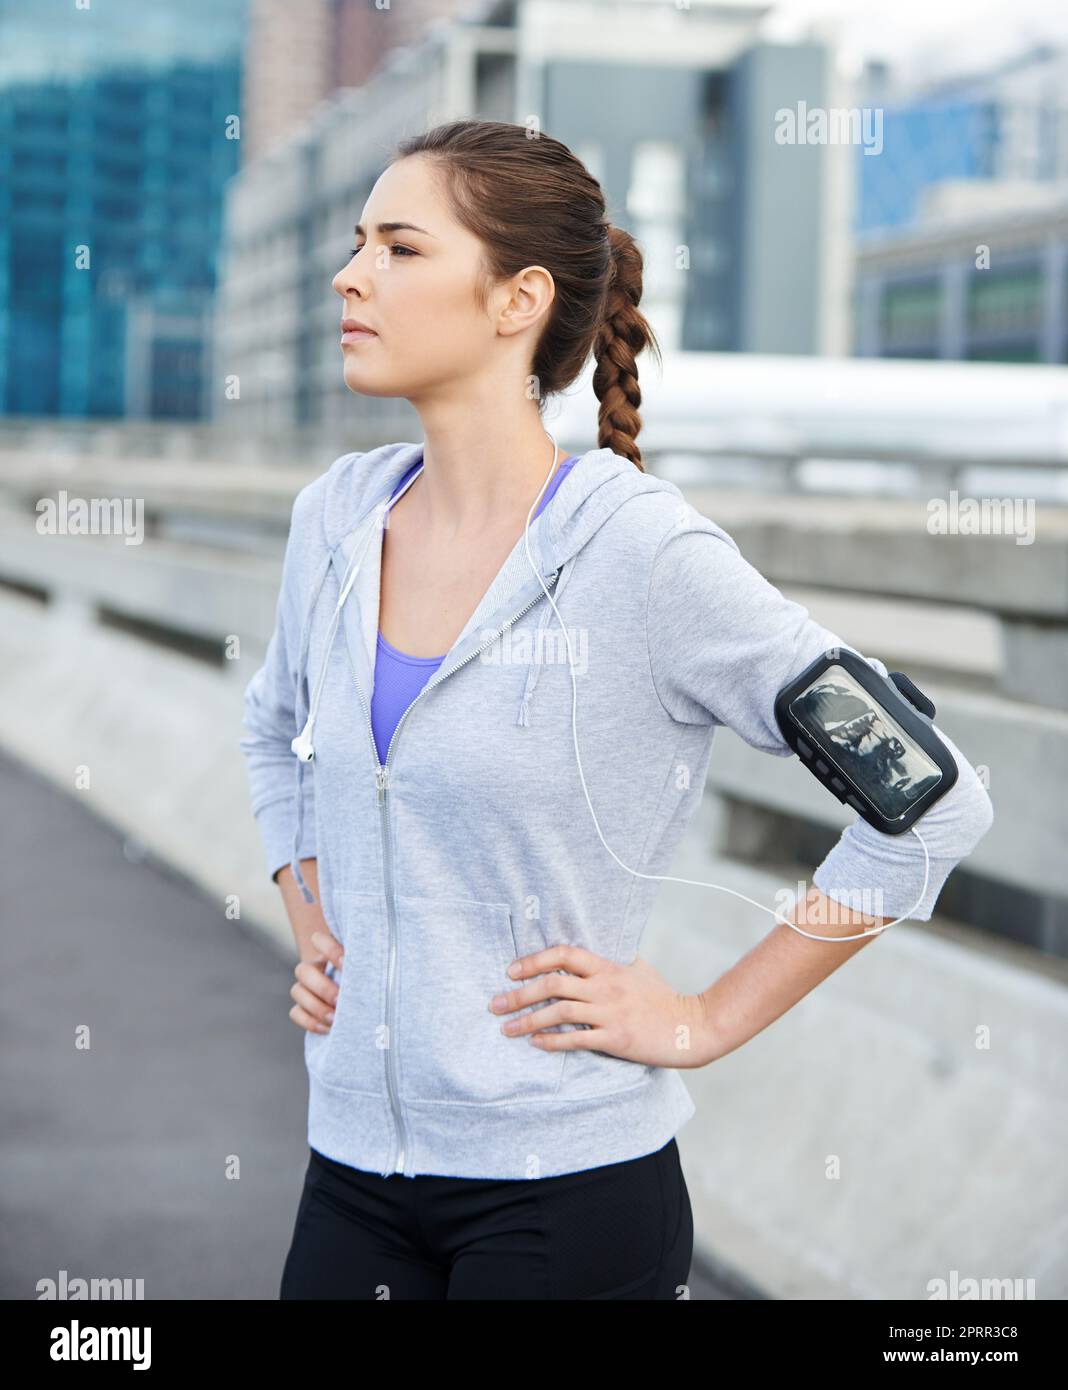 Ready to run to the music. a young female jogger listening to music before a run through the city. Stock Photo